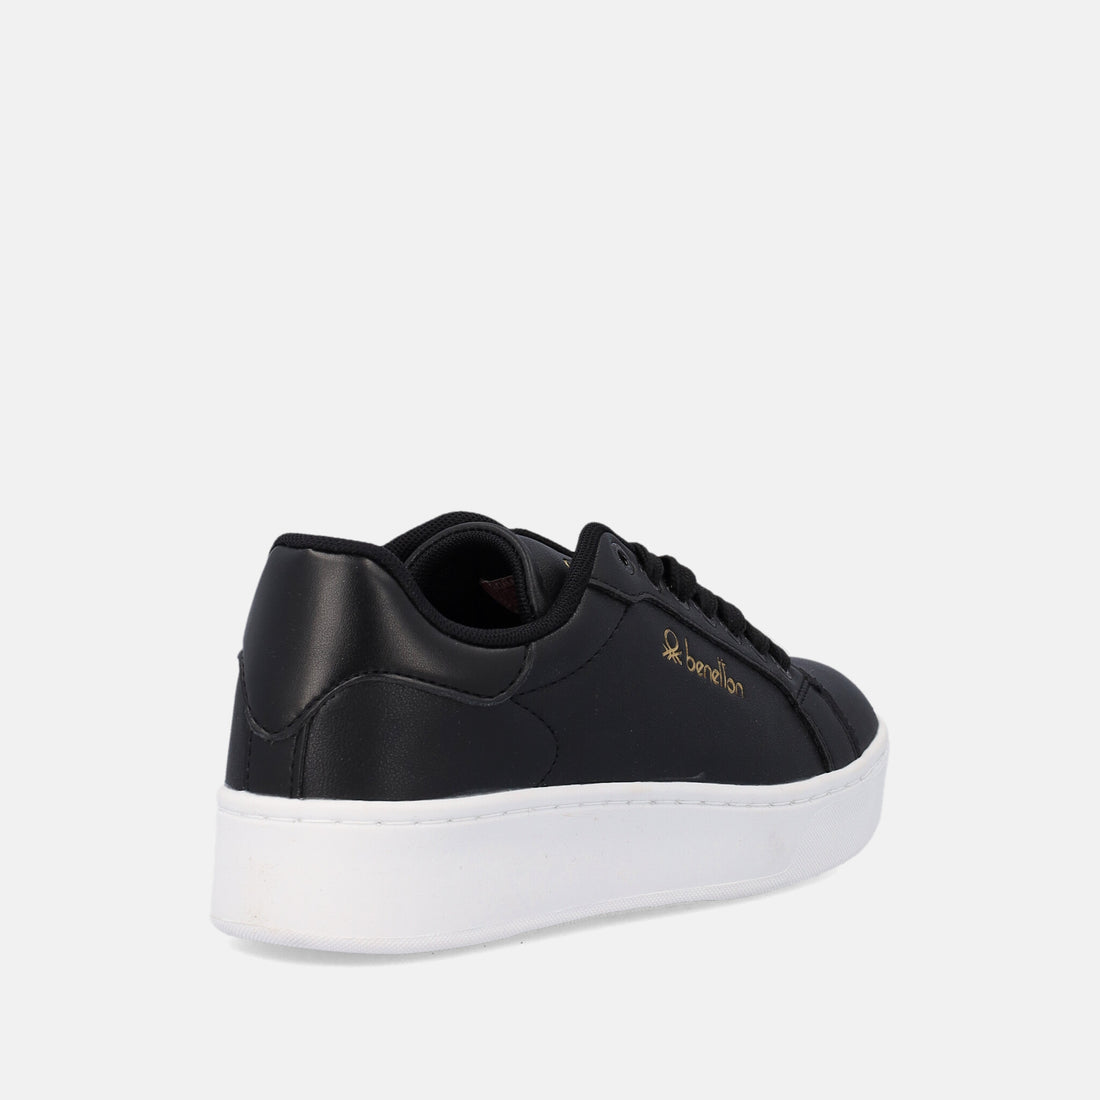 Sneakers donna Benetton